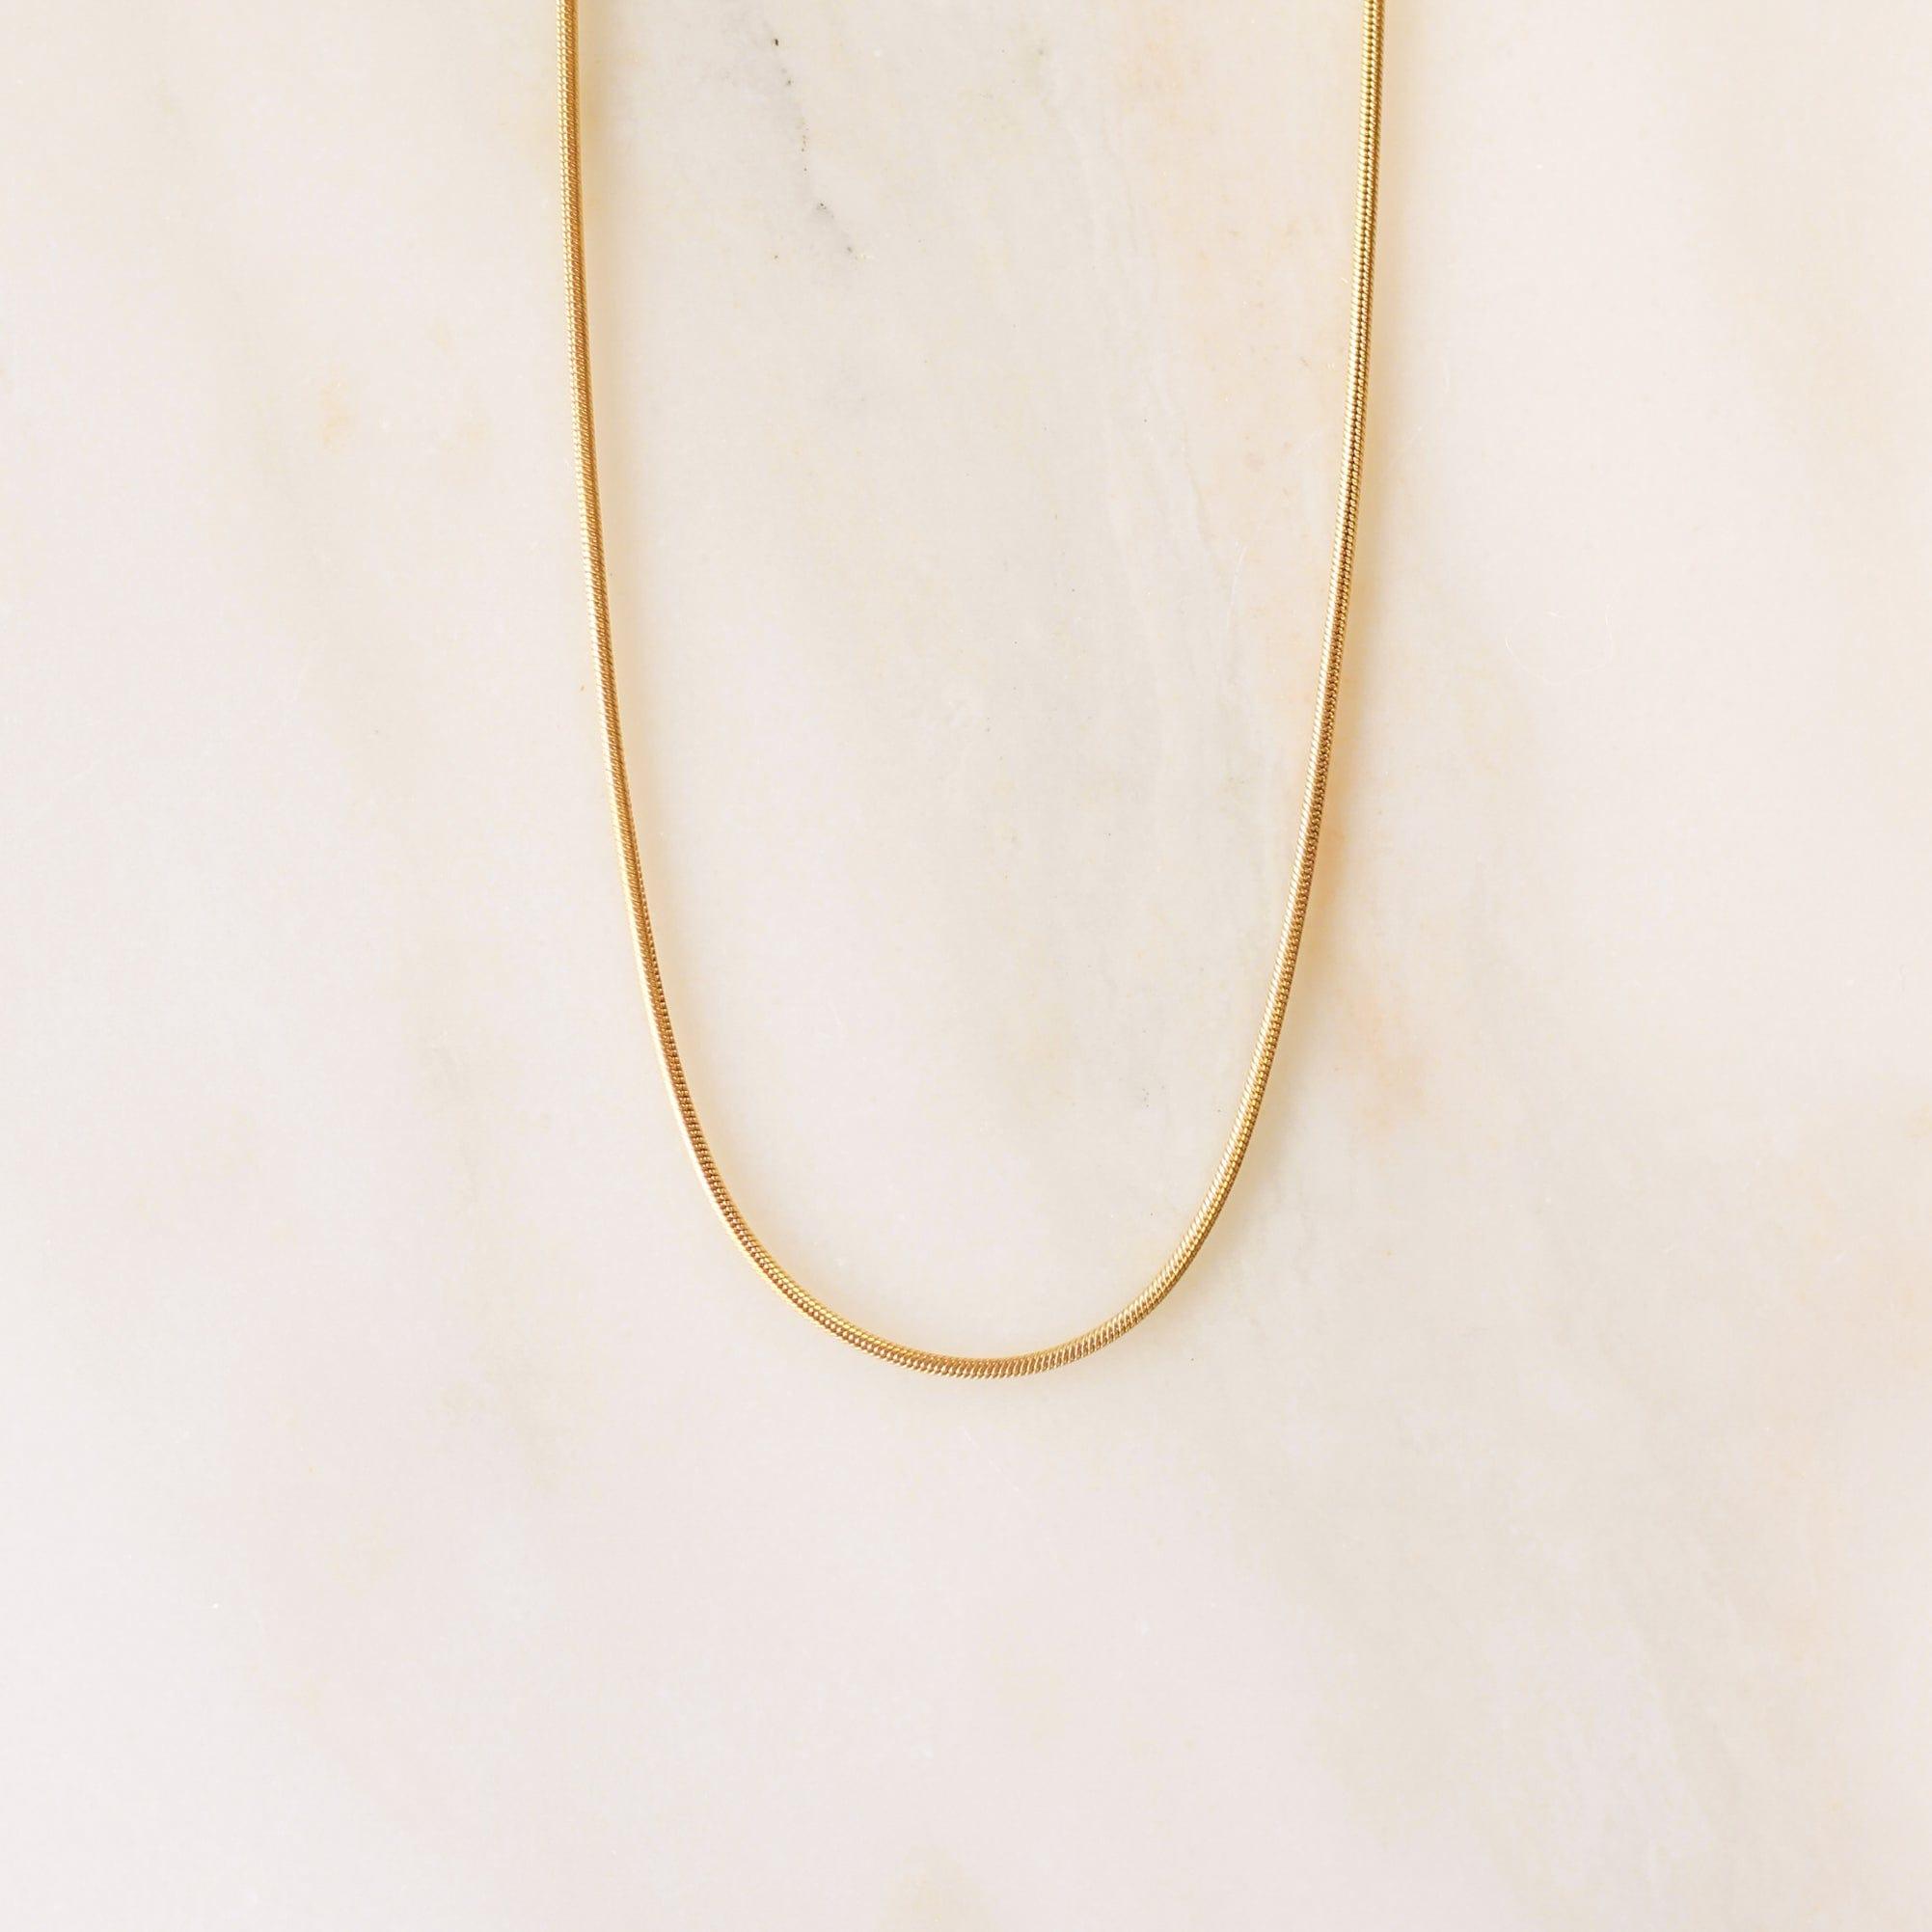 Janis Chain Necklace - Nolia Jewelry - Meaningful + Sustainably Handcrafted Jewelry